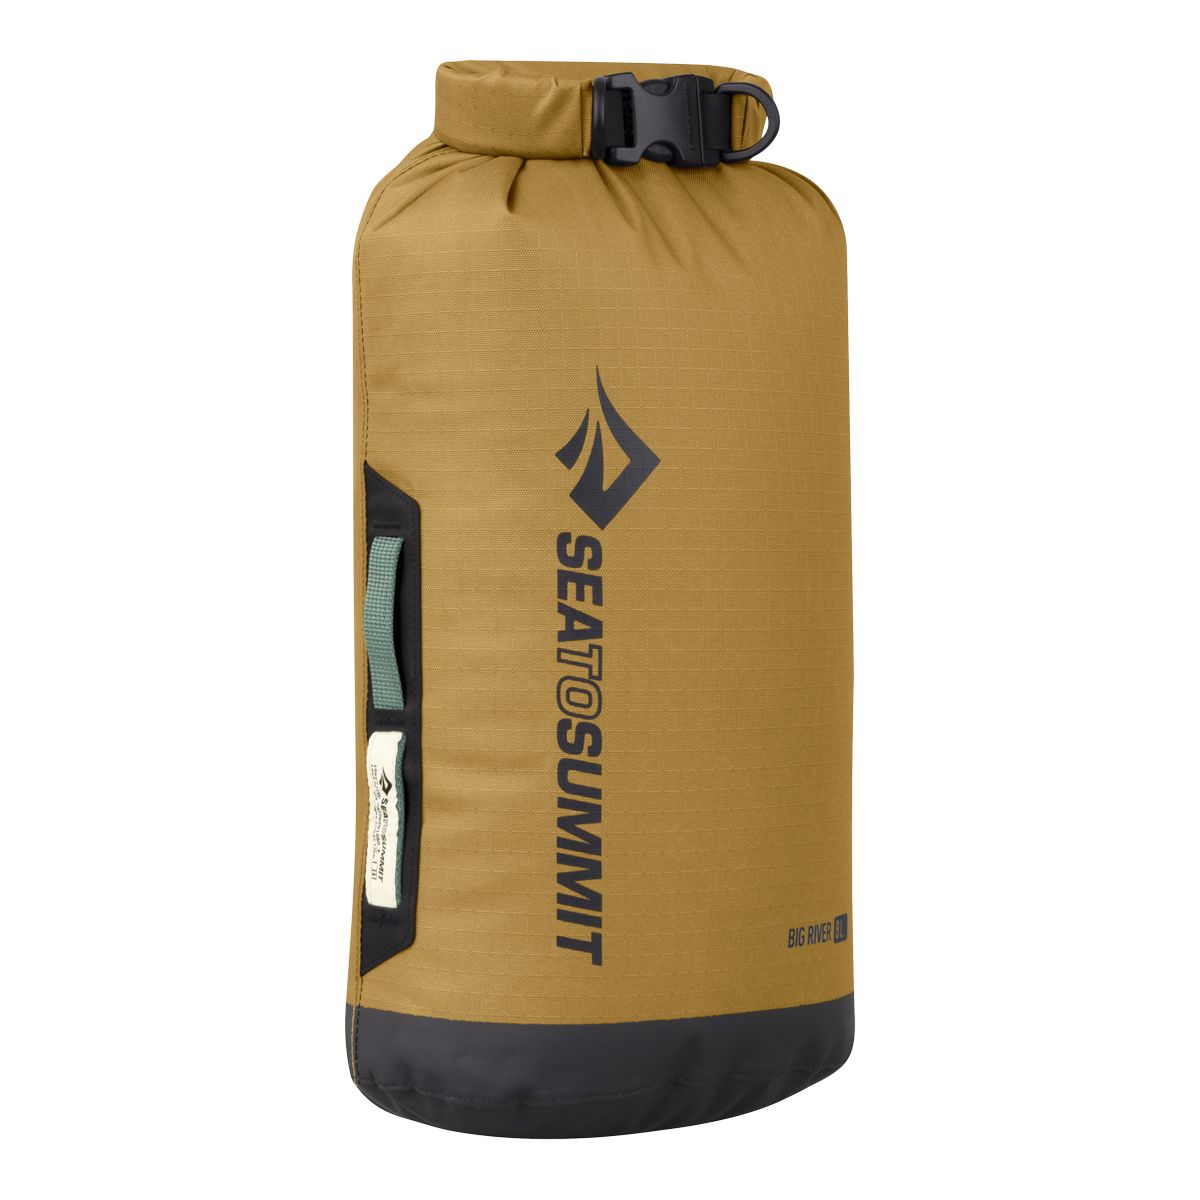 Image of Sea to Summit Big River 8L Small Dry Bag